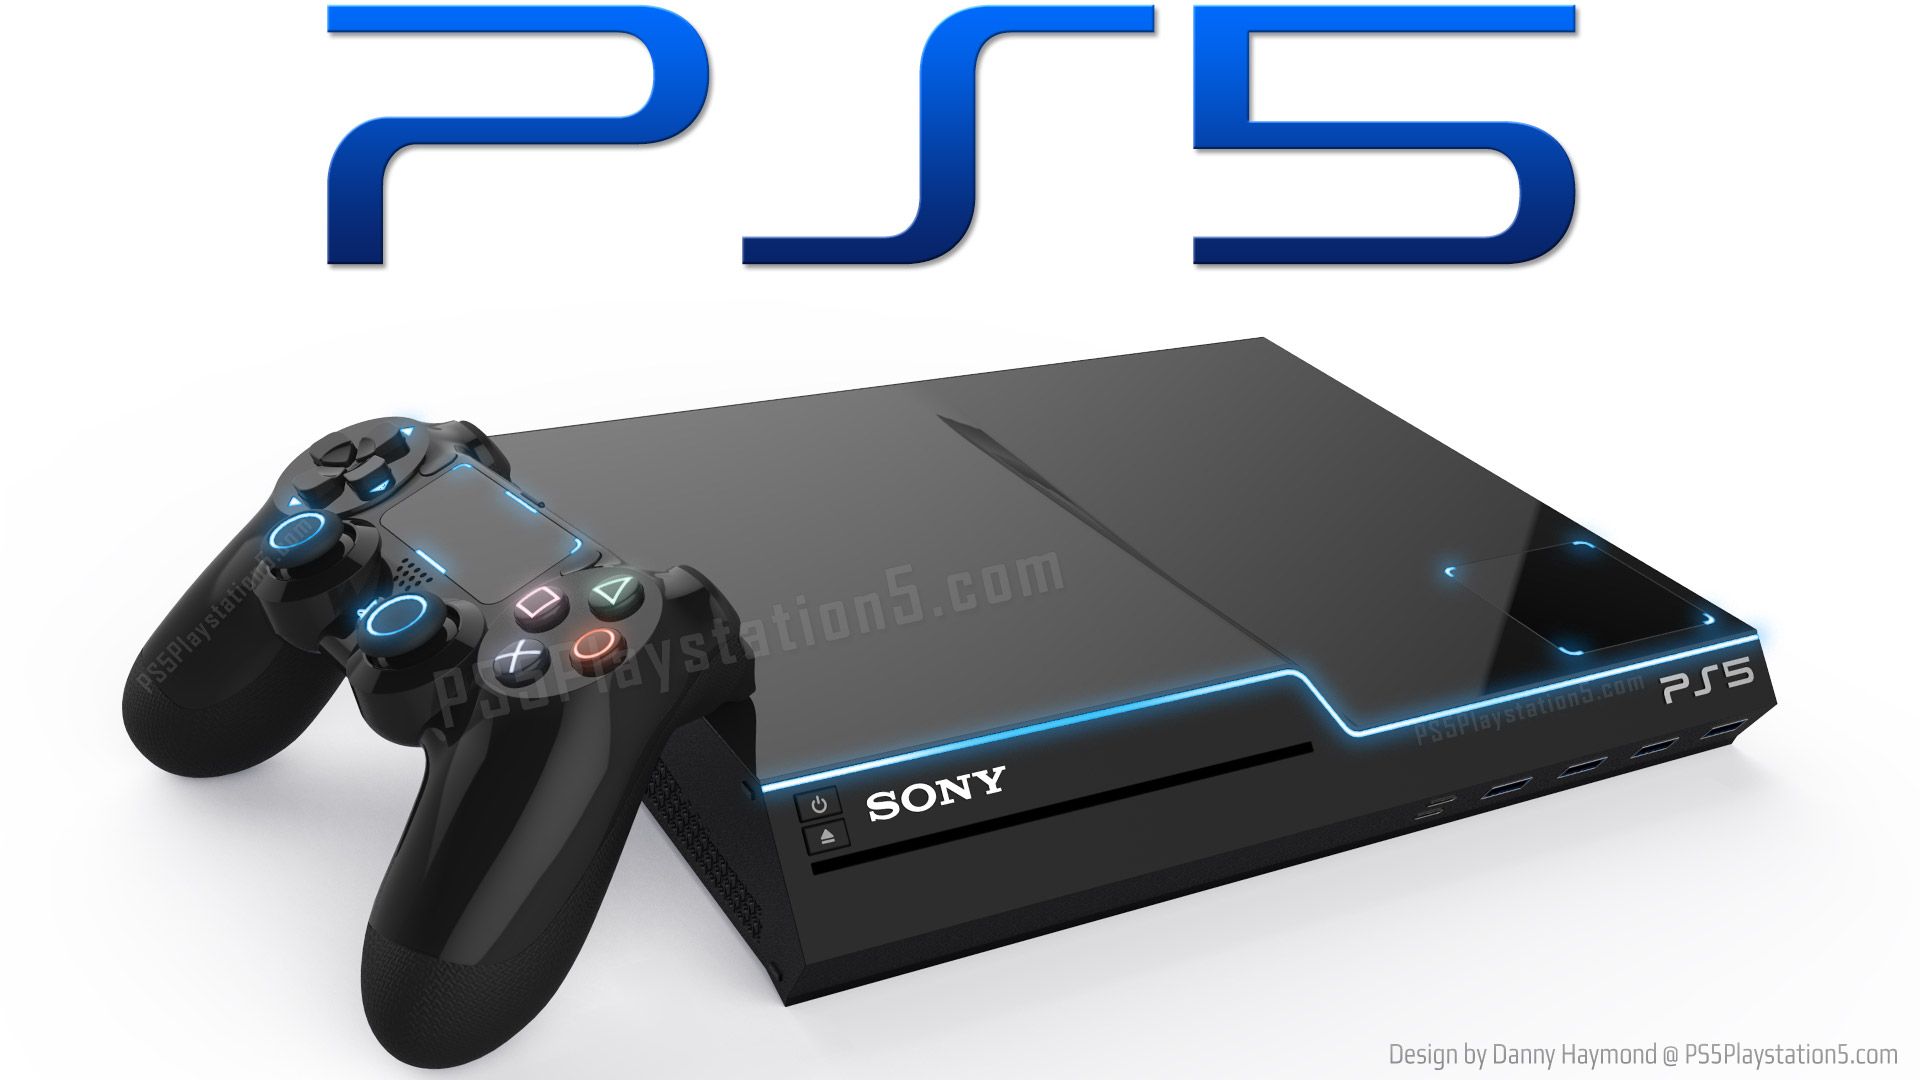 PS5 News, Release Date, Price, Specs, Games & Picture